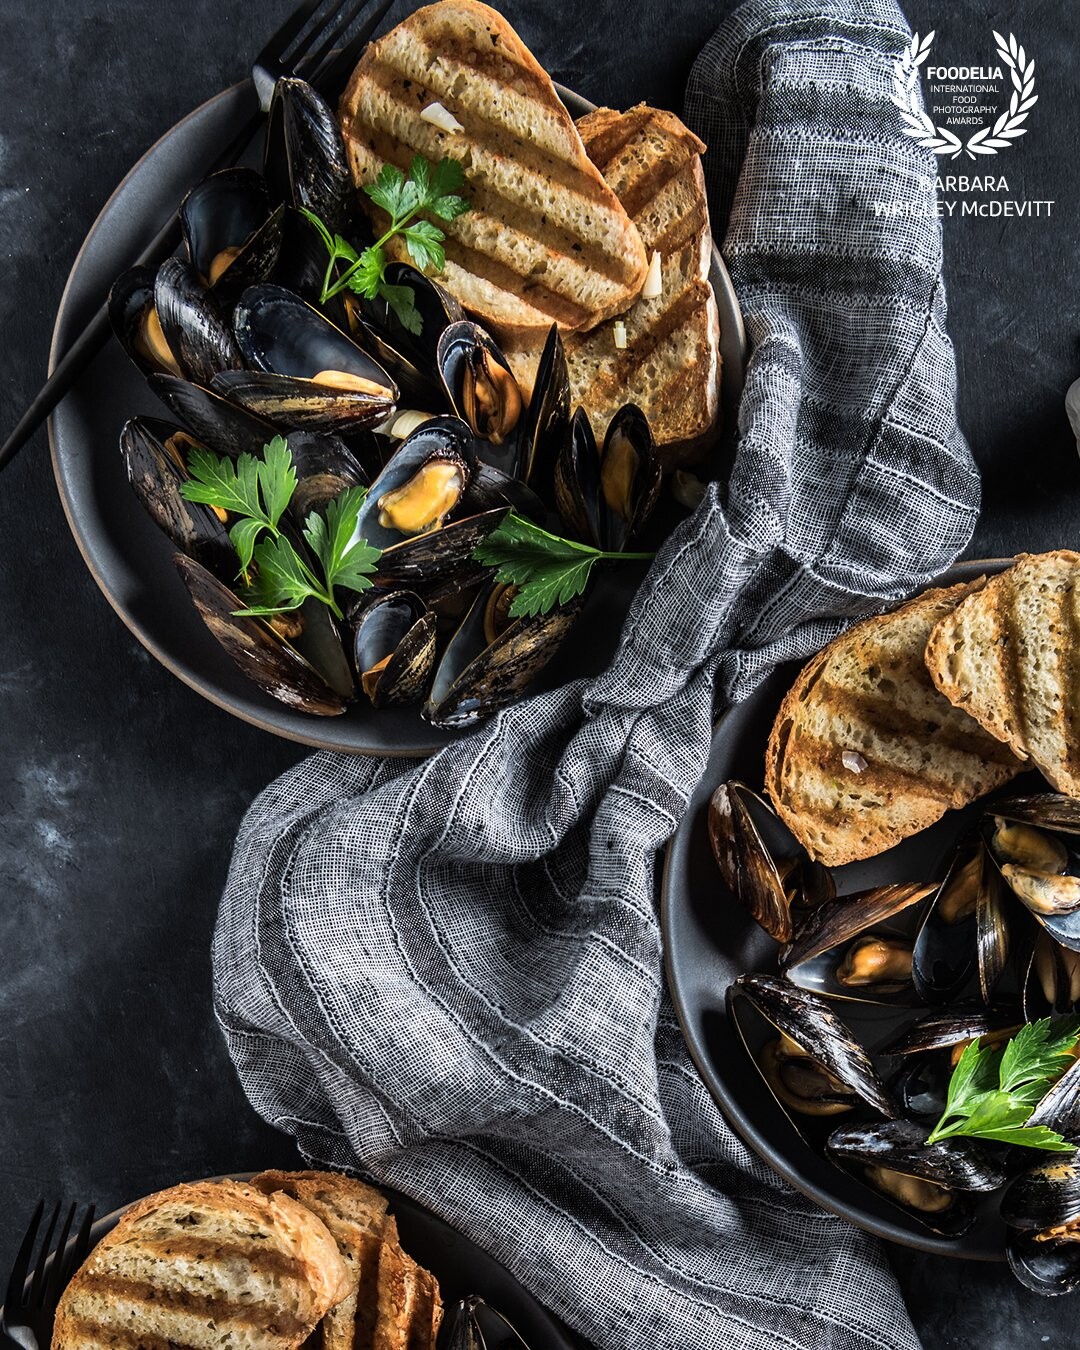 Mussels steamed in a white wine, olive oil and parsley broth.  Crusty bread added to sop up all that goodness.<br />
<br />
Shot on a Nikon D850 with a 24-70 lens.  Profoto B1 artificial light at 7.1 with a rectangular soft box.